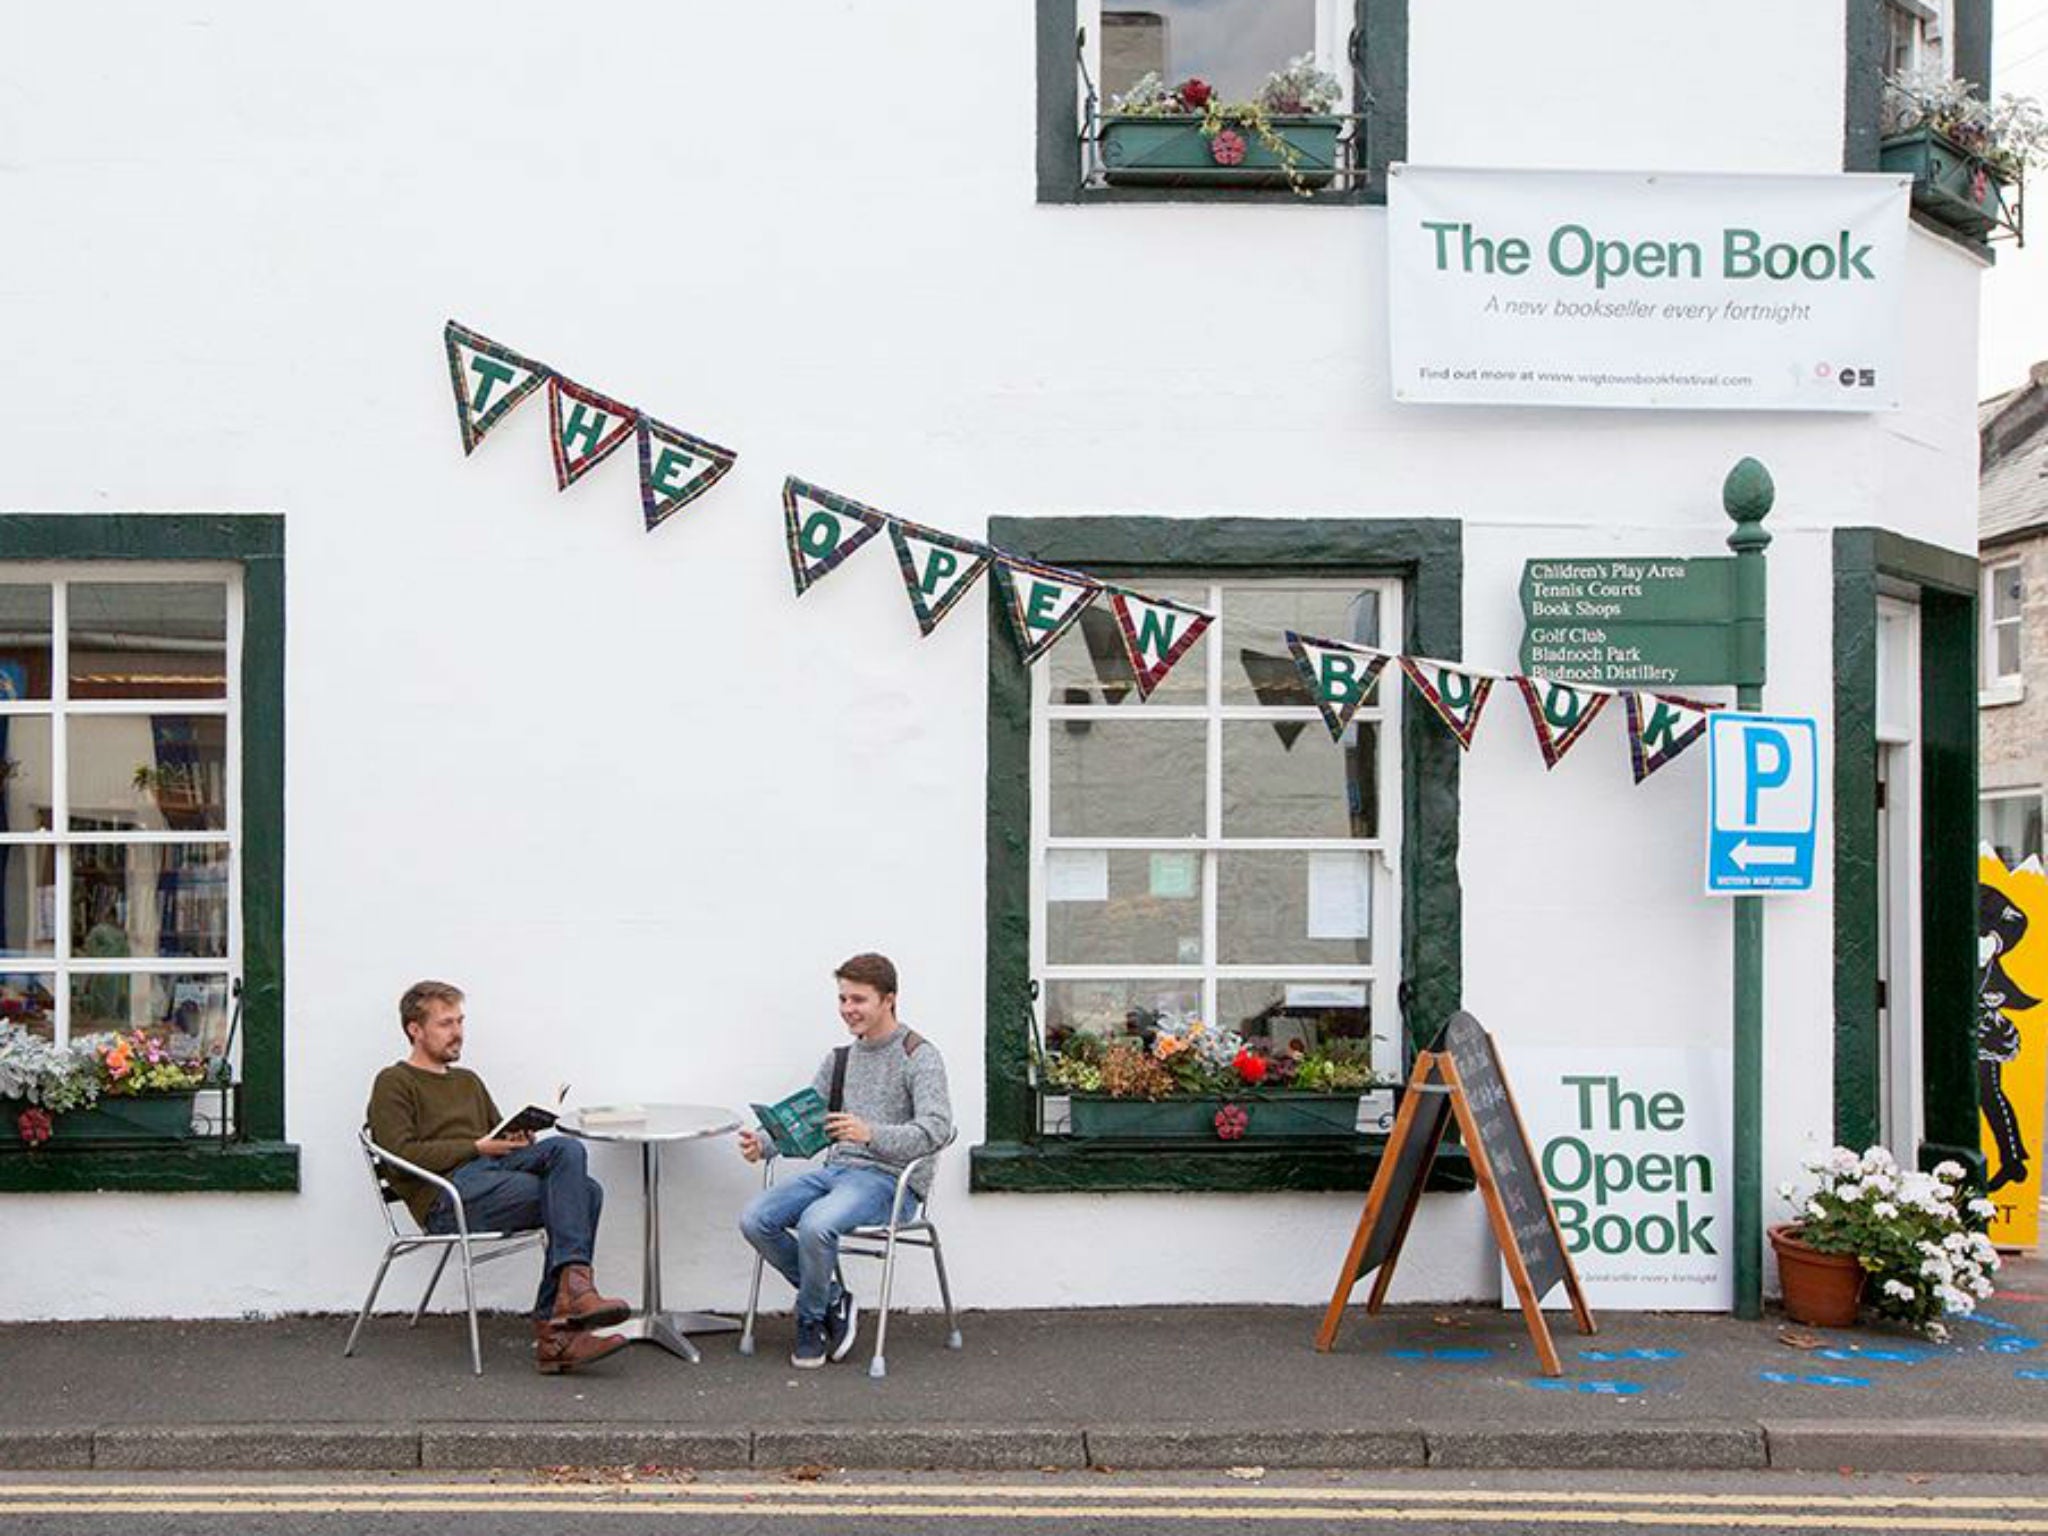 The Open Book store in Wigtown, Scotland is opening its doors to holidaymakers